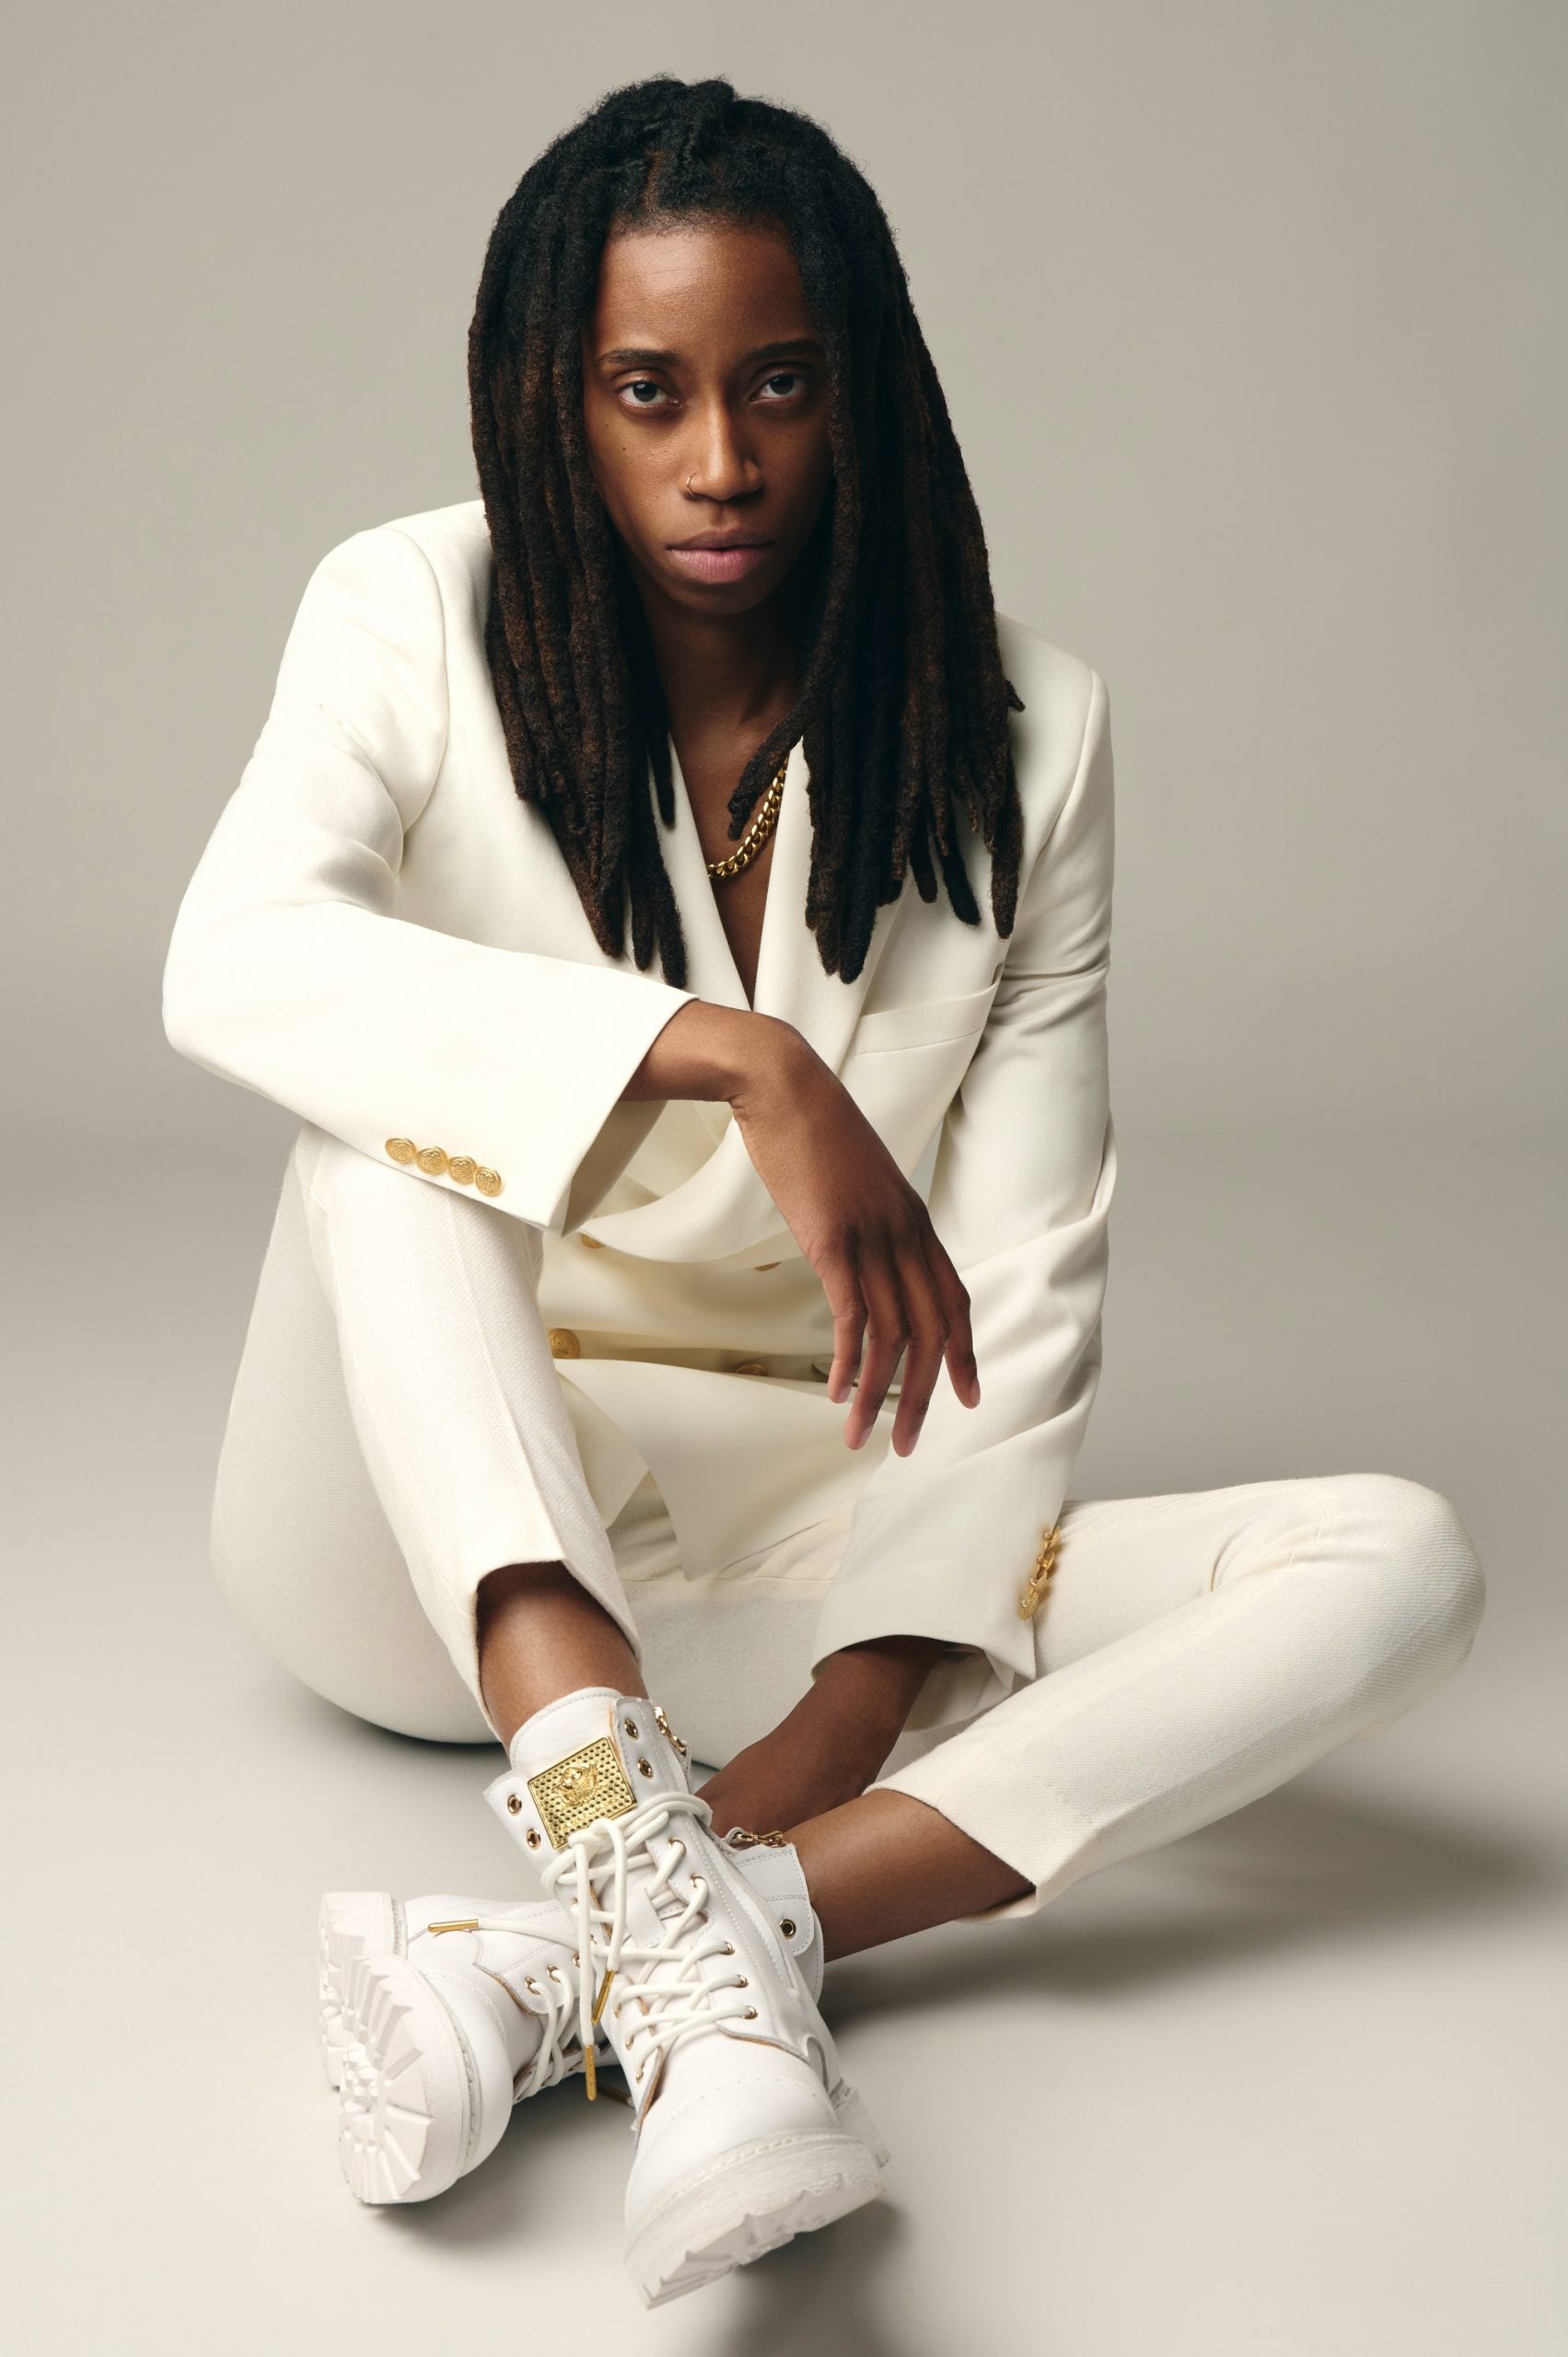 This Black Woman Is One Of The Youngest, Black Female Luxury Shoe Designers